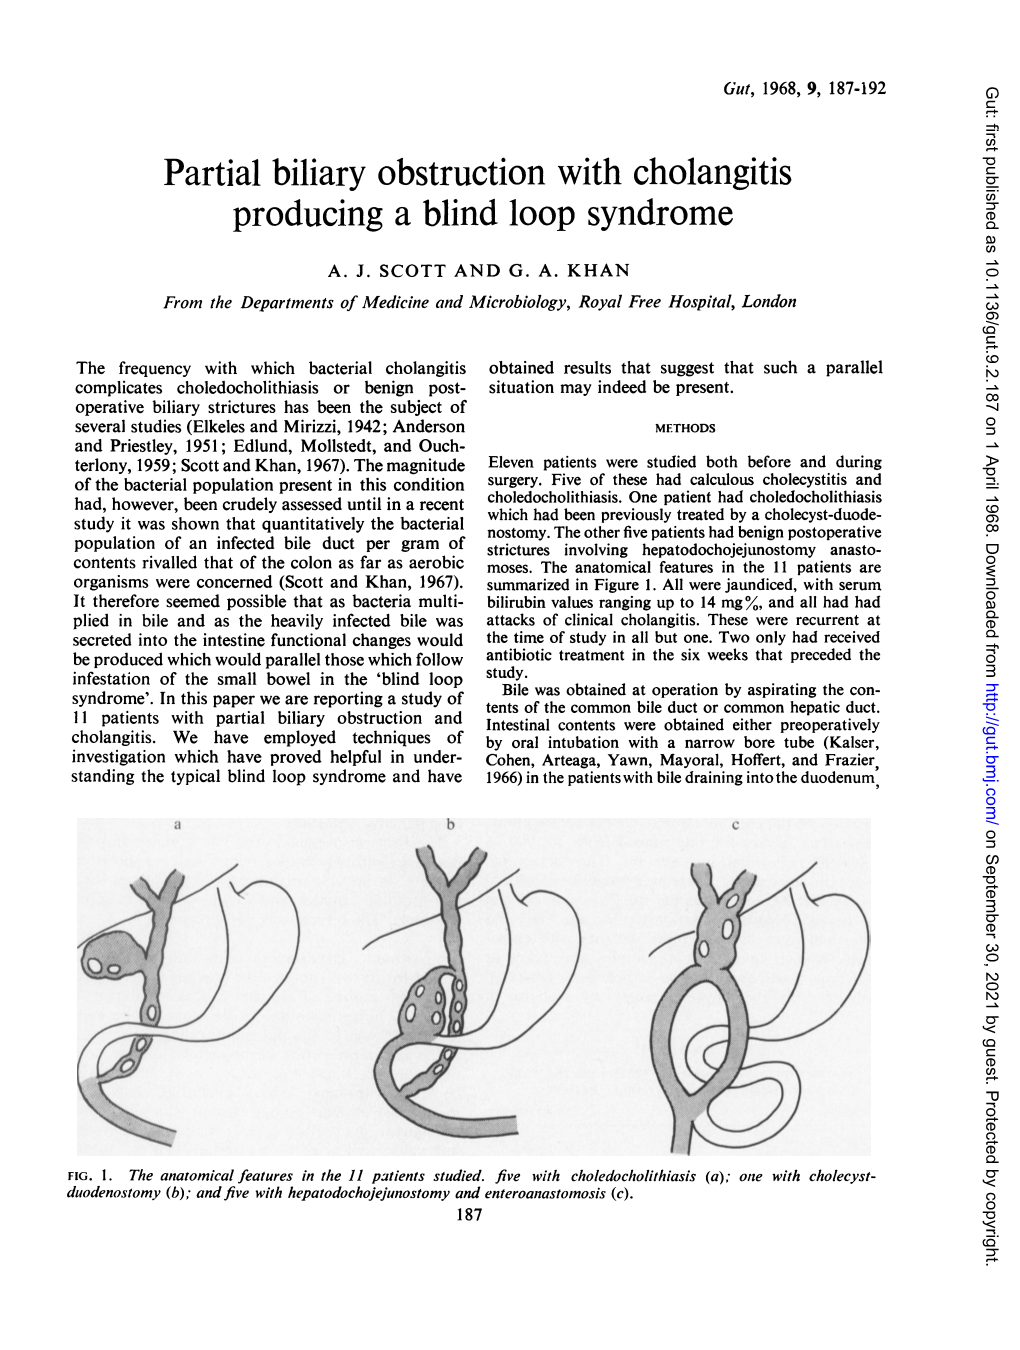 Partial Biliary Obstruction with Cholangitis Producing a Blind Loop Syndrome